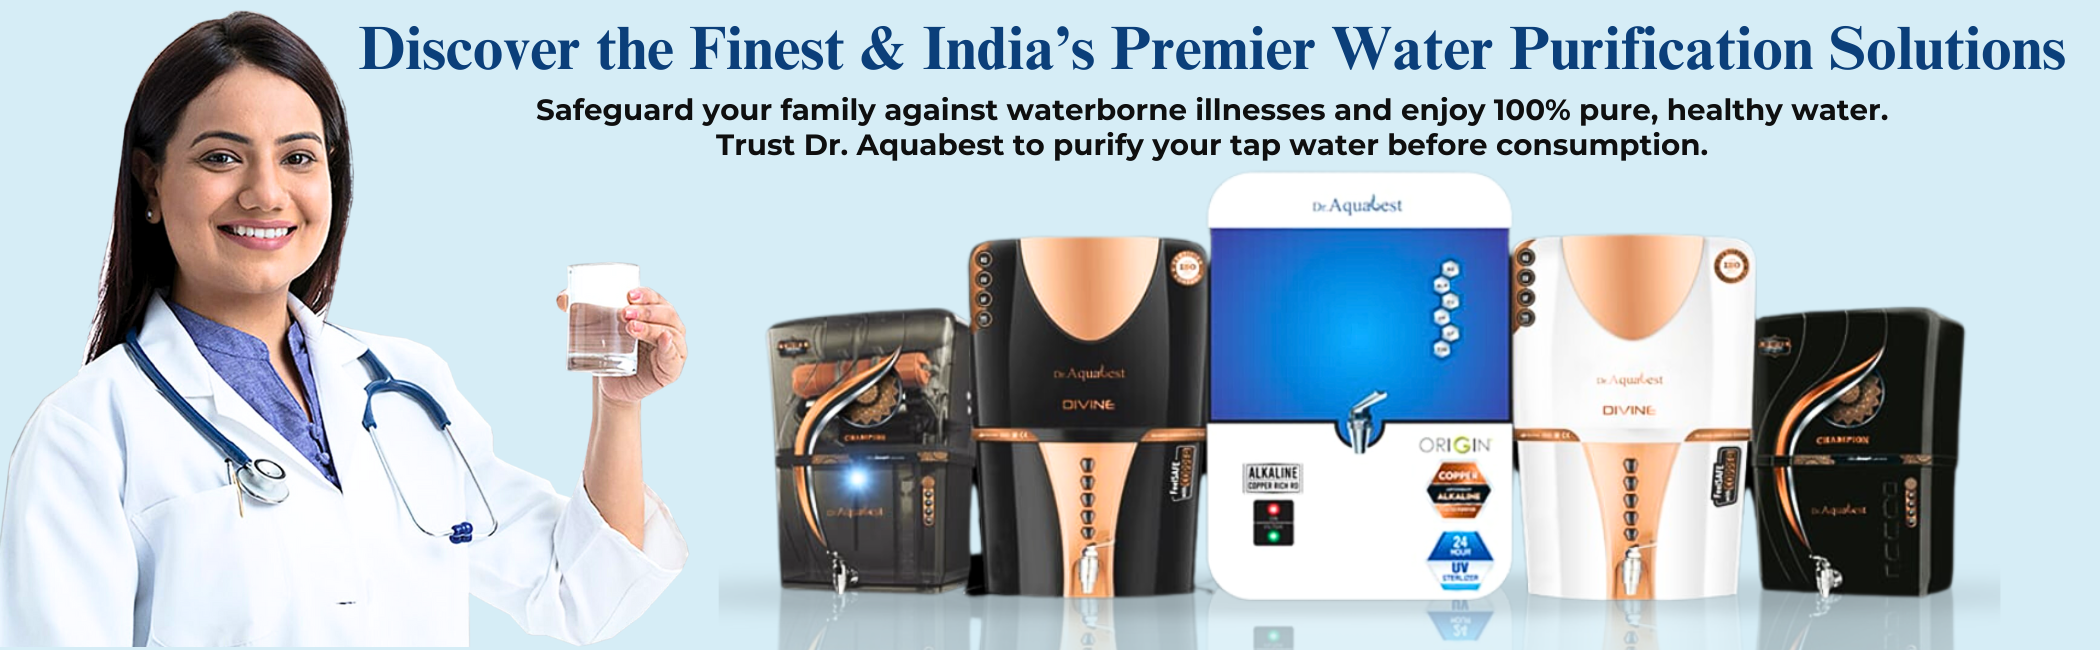 dr-aquabest-endorsed-water-purifiers